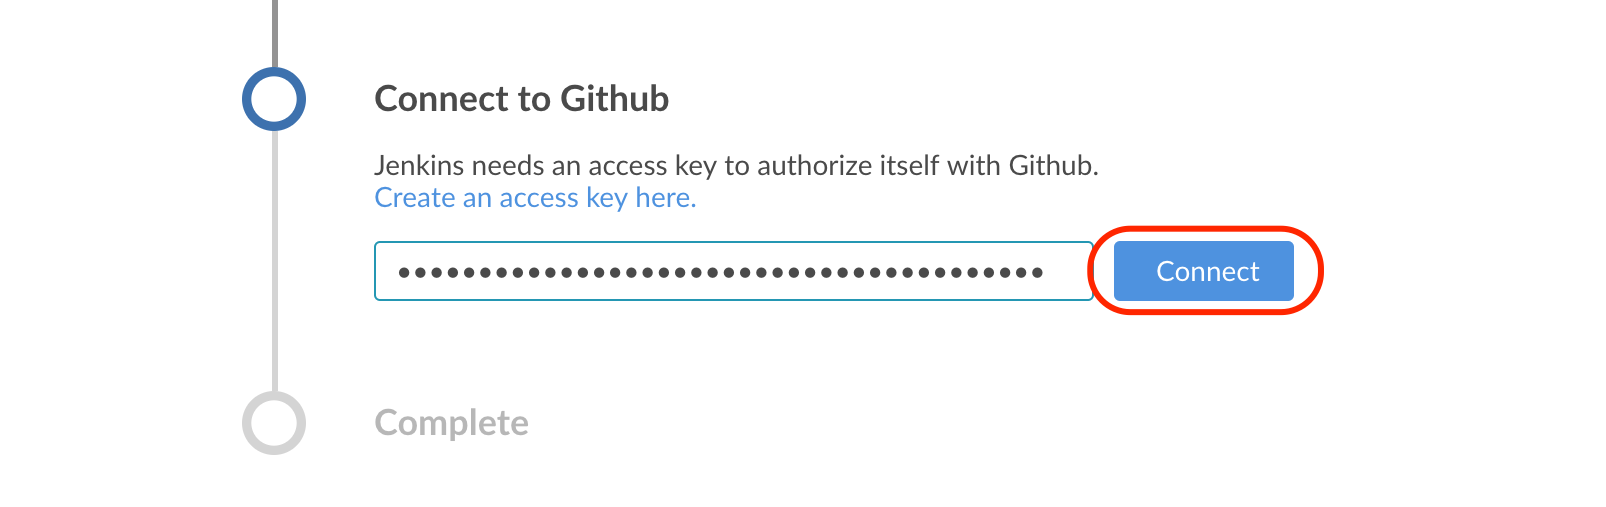 Pipeline creation - GitHub personal access token pasted into CloudBees CI, connect button highlighted